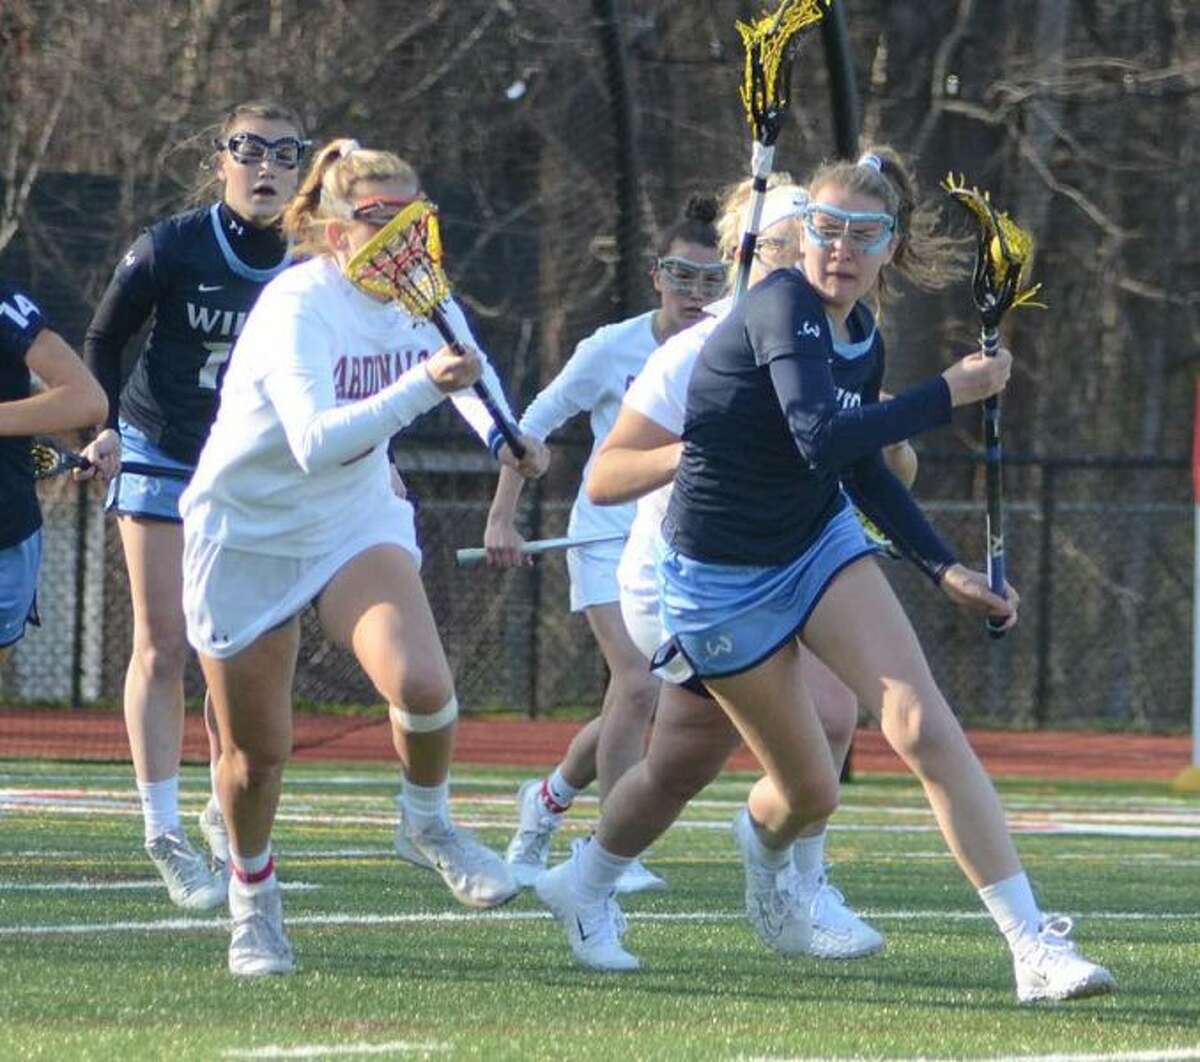 Olivia Roman tries to keep the ball away from a pair of Greenwich players during the Wilton High girls lacrosse team's win on Friday. — J.B. Cozens photo